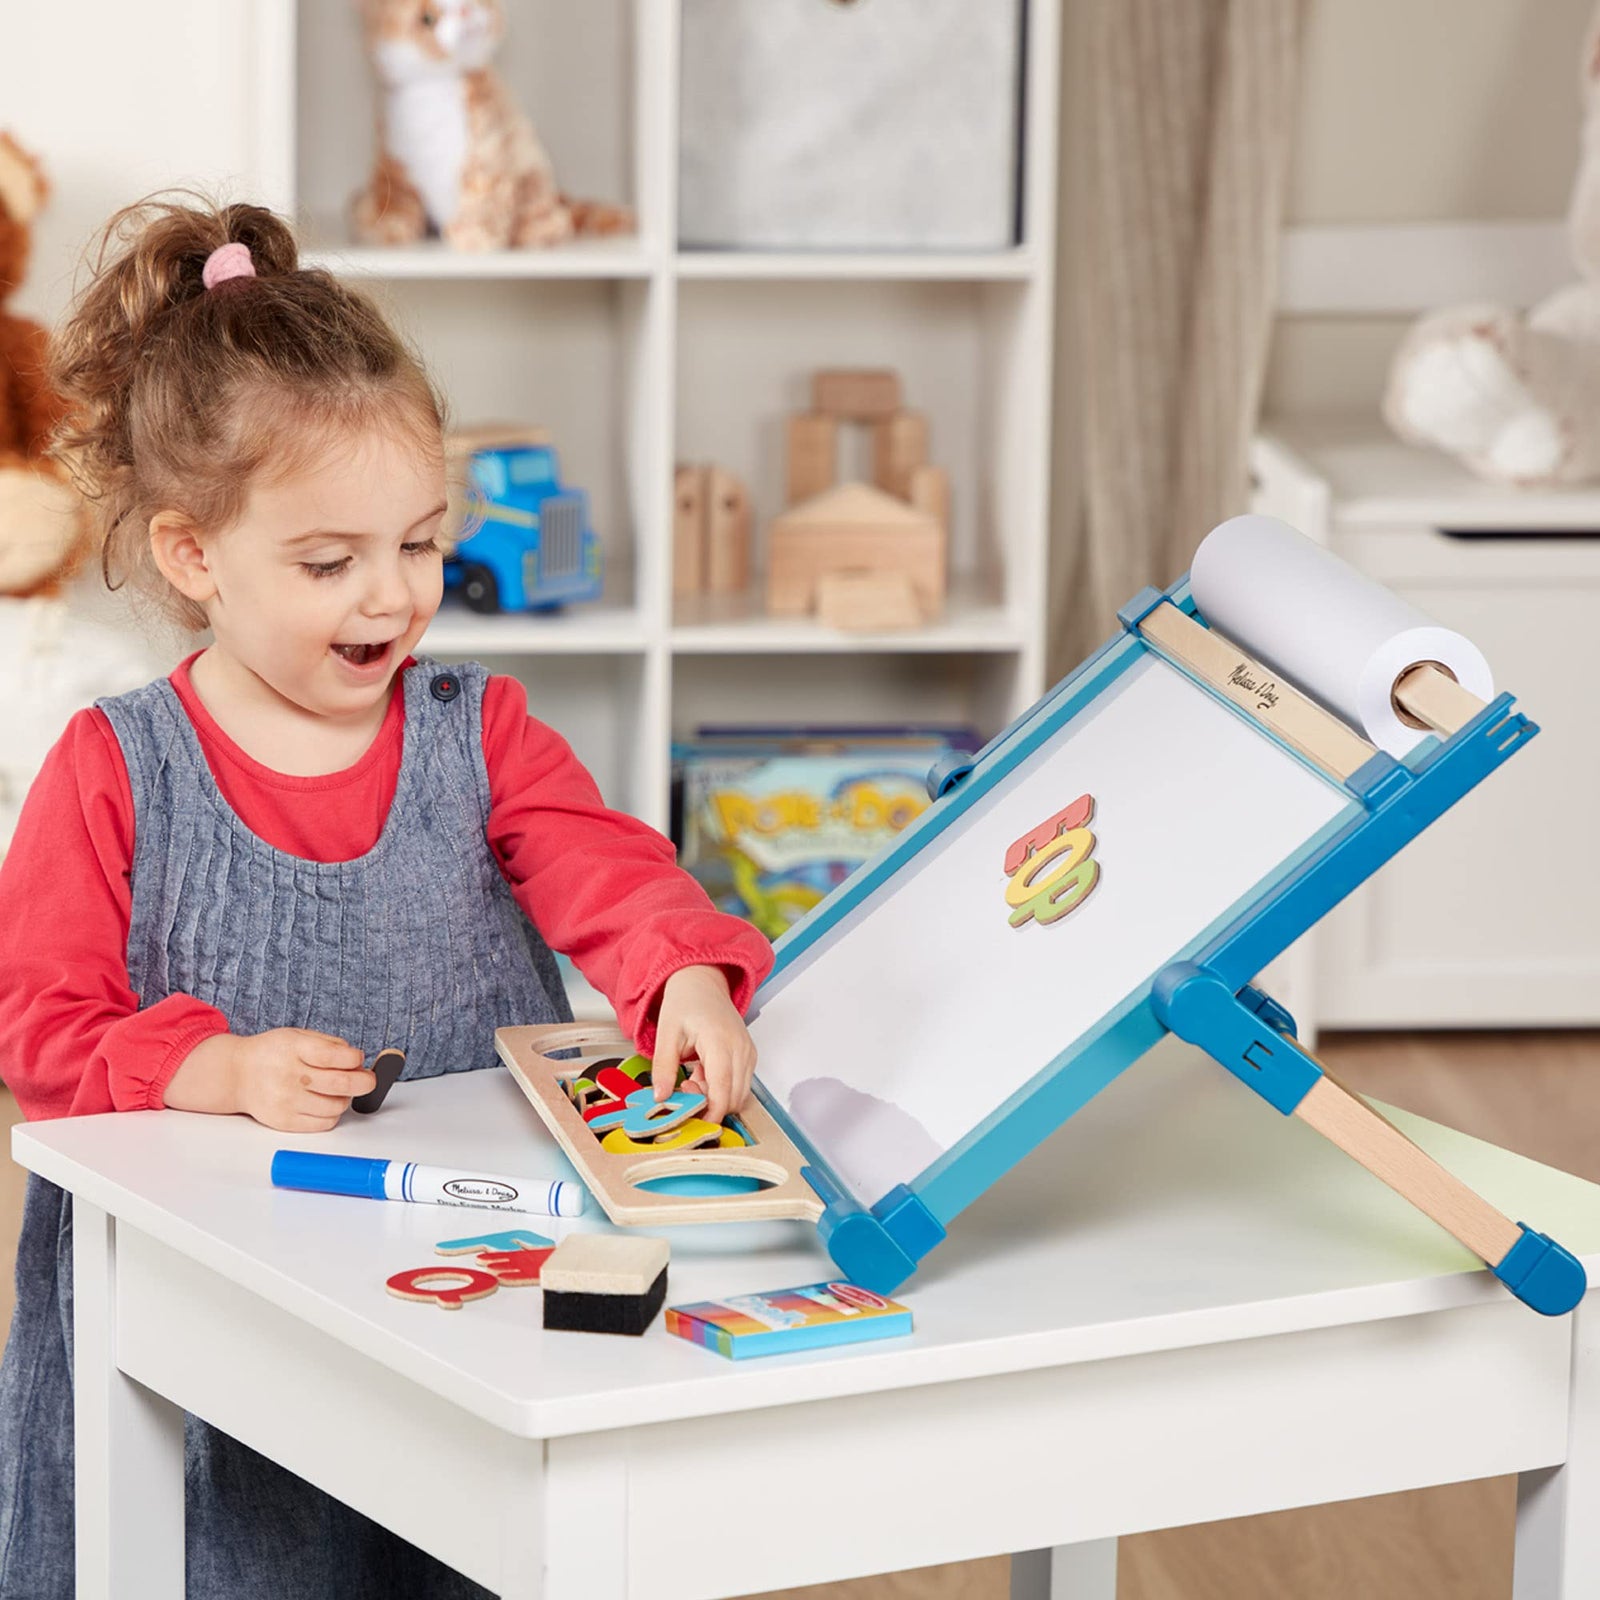 Melissa & Doug Deluxe Double-Sided Tabletop Easel (E-Commerce Packaging, Arts & Crafts, 42 Pieces, 17.5” H x 20.75” W x 2.75” L, Great Gift for Girls and Boys - Best for 3, 4, 5 Year Olds and Up)